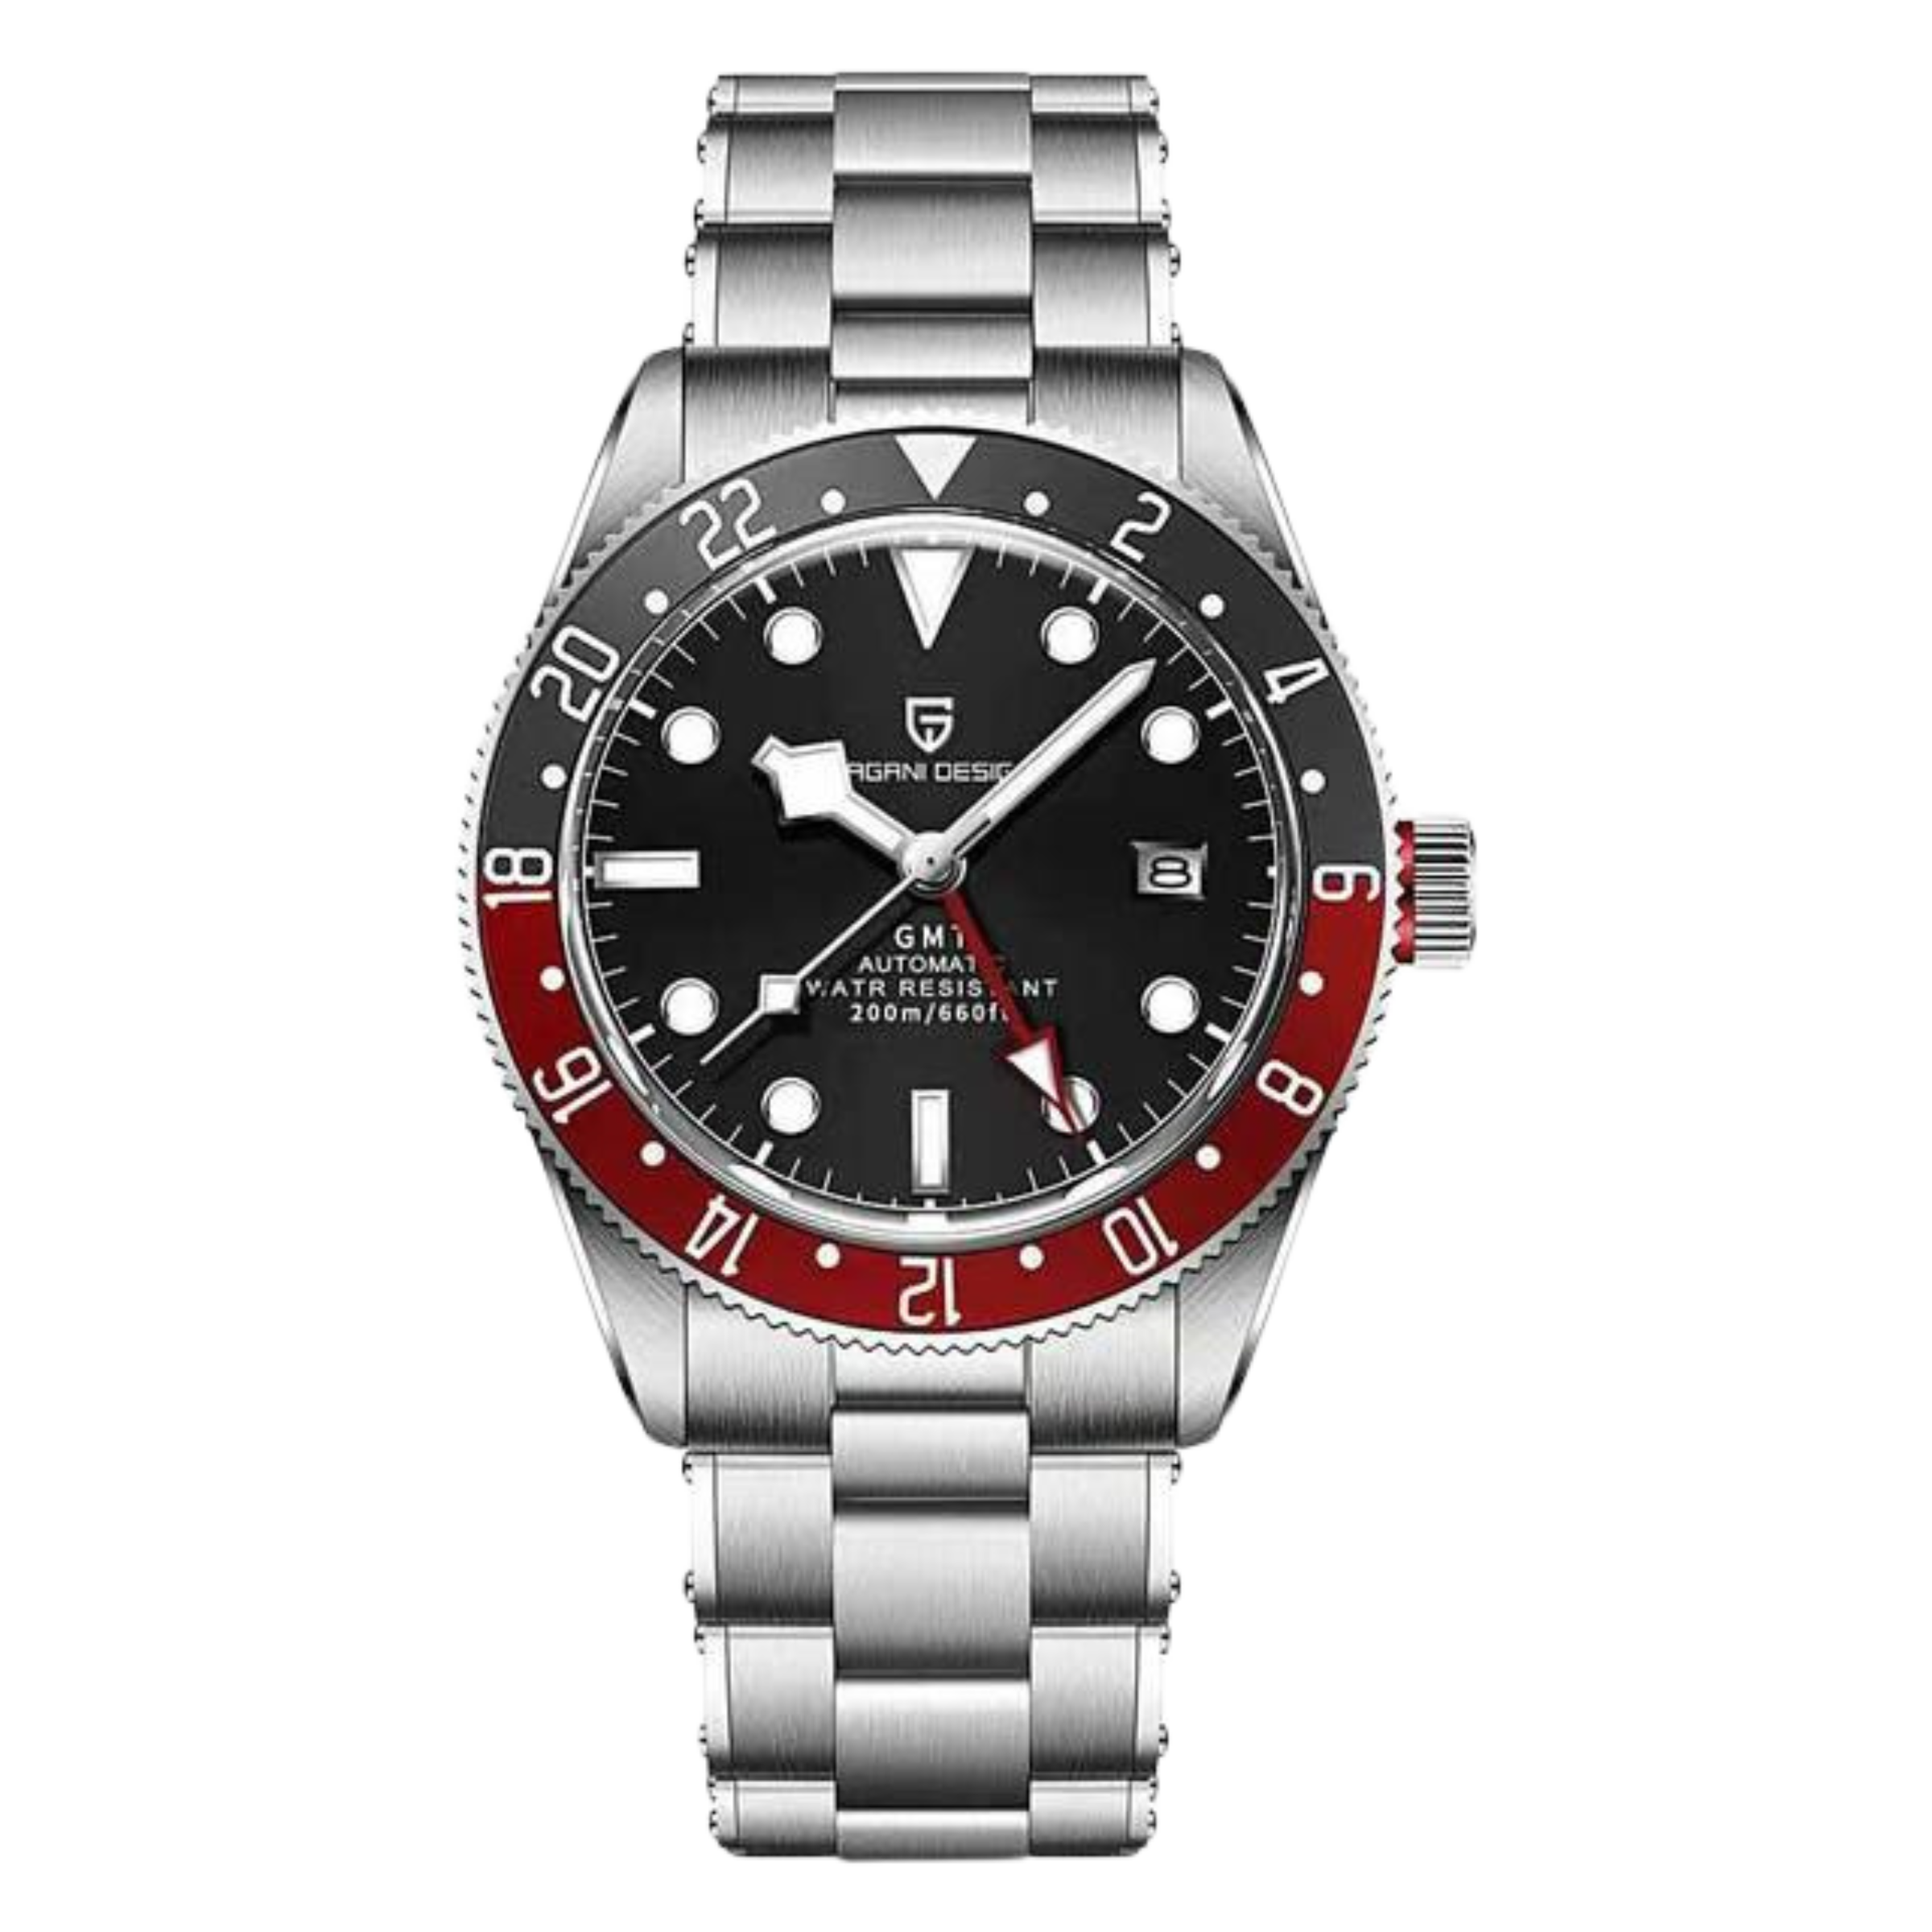 PD-1706 GMT